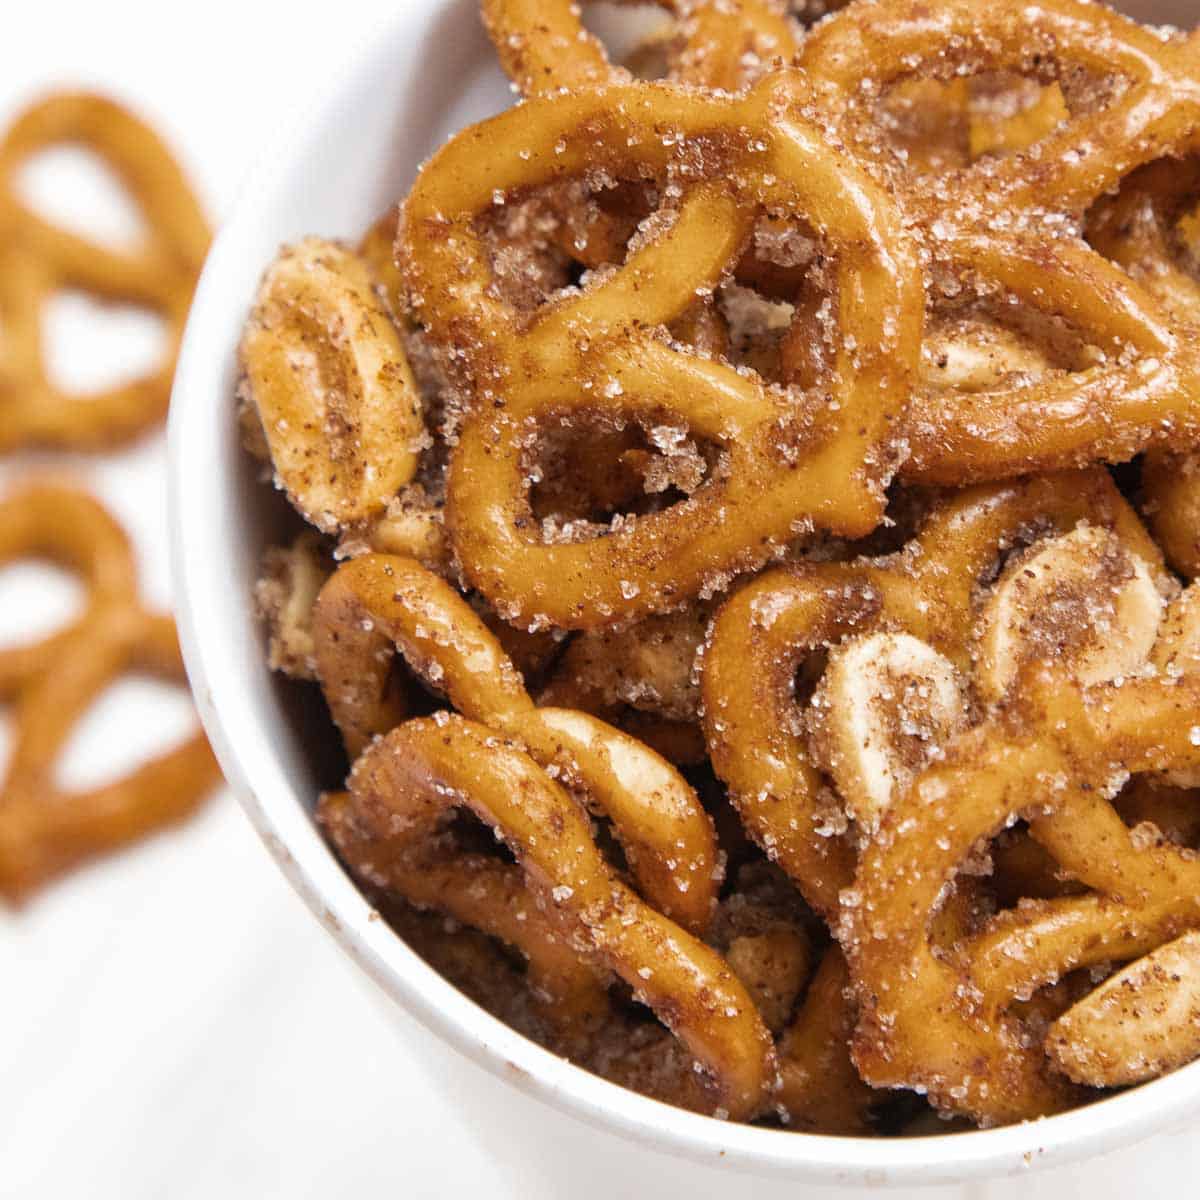 Overhead close up shot of cinnamon pretzels in a white cup with more scattered on a white surface in the background.